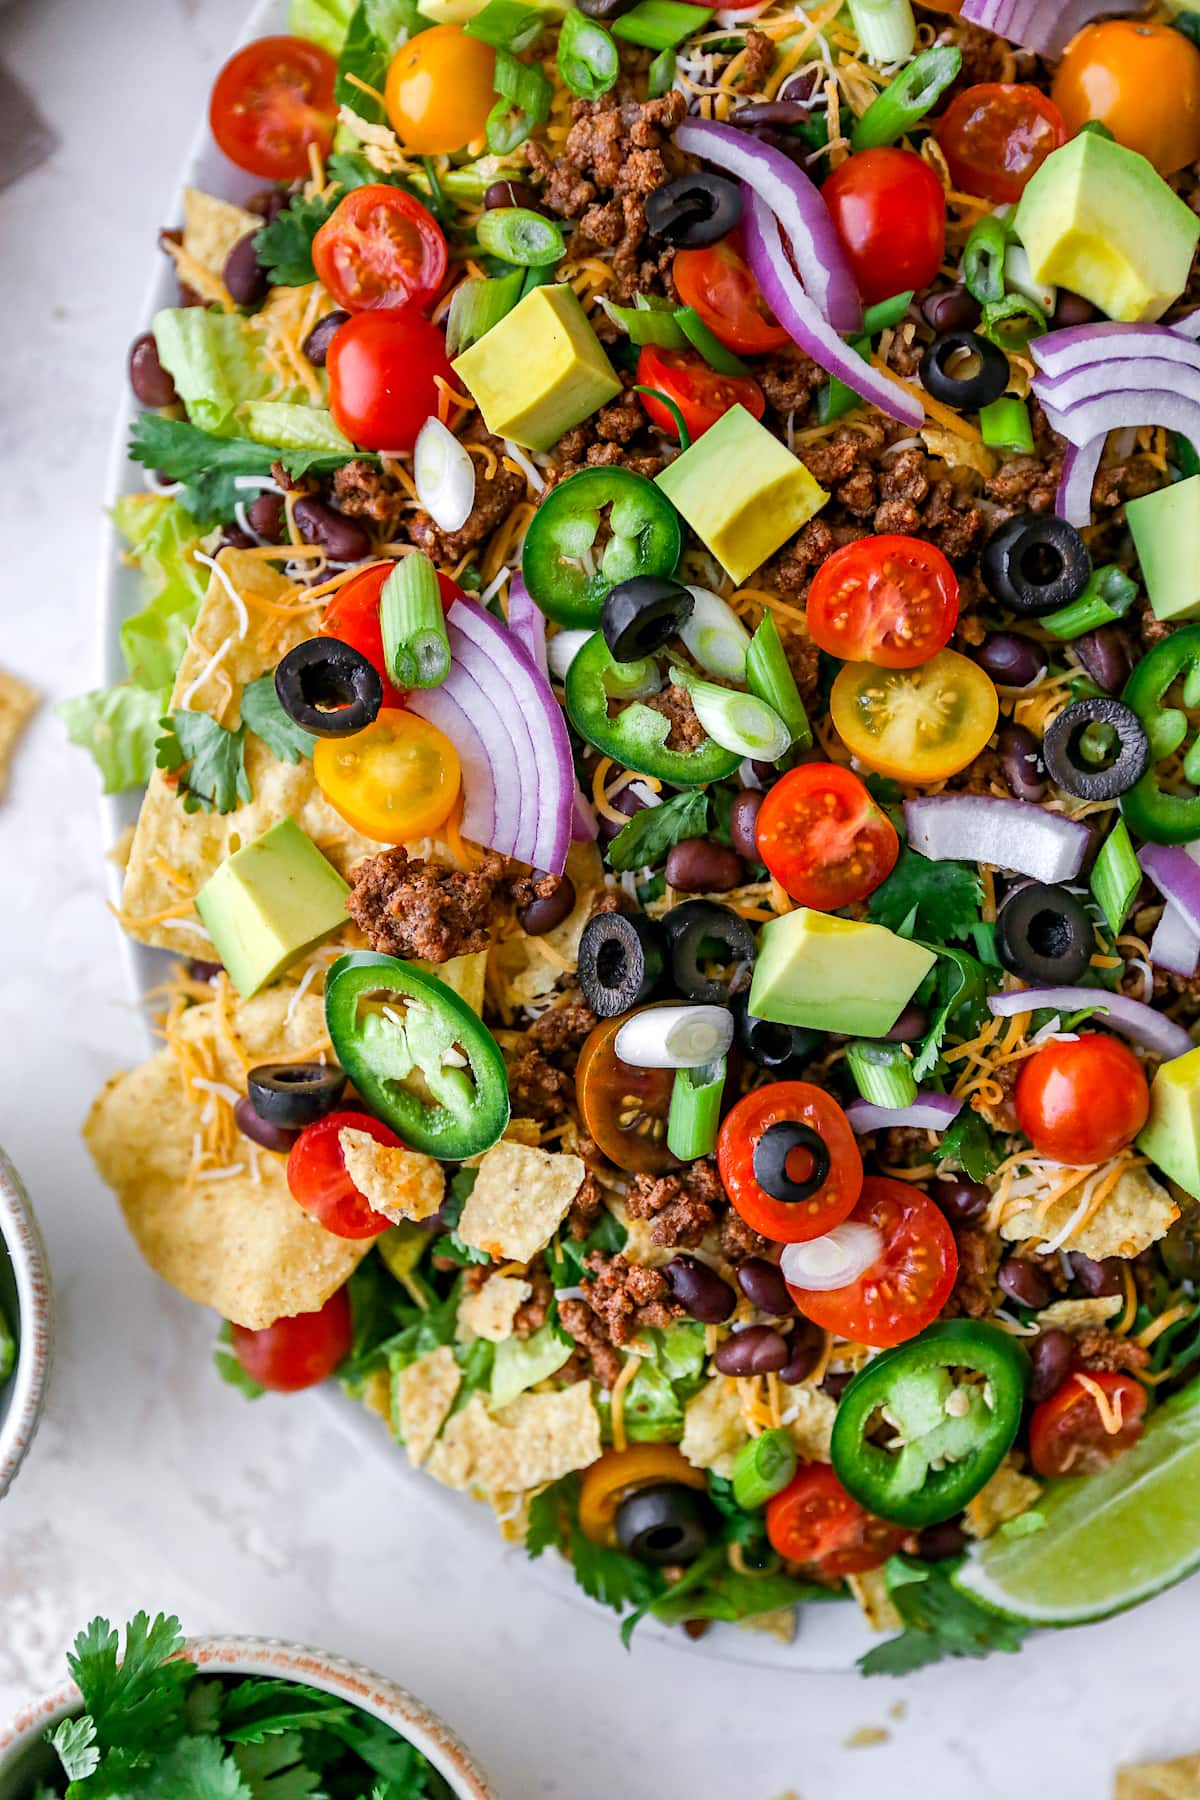 taco salad with chips and toppings.